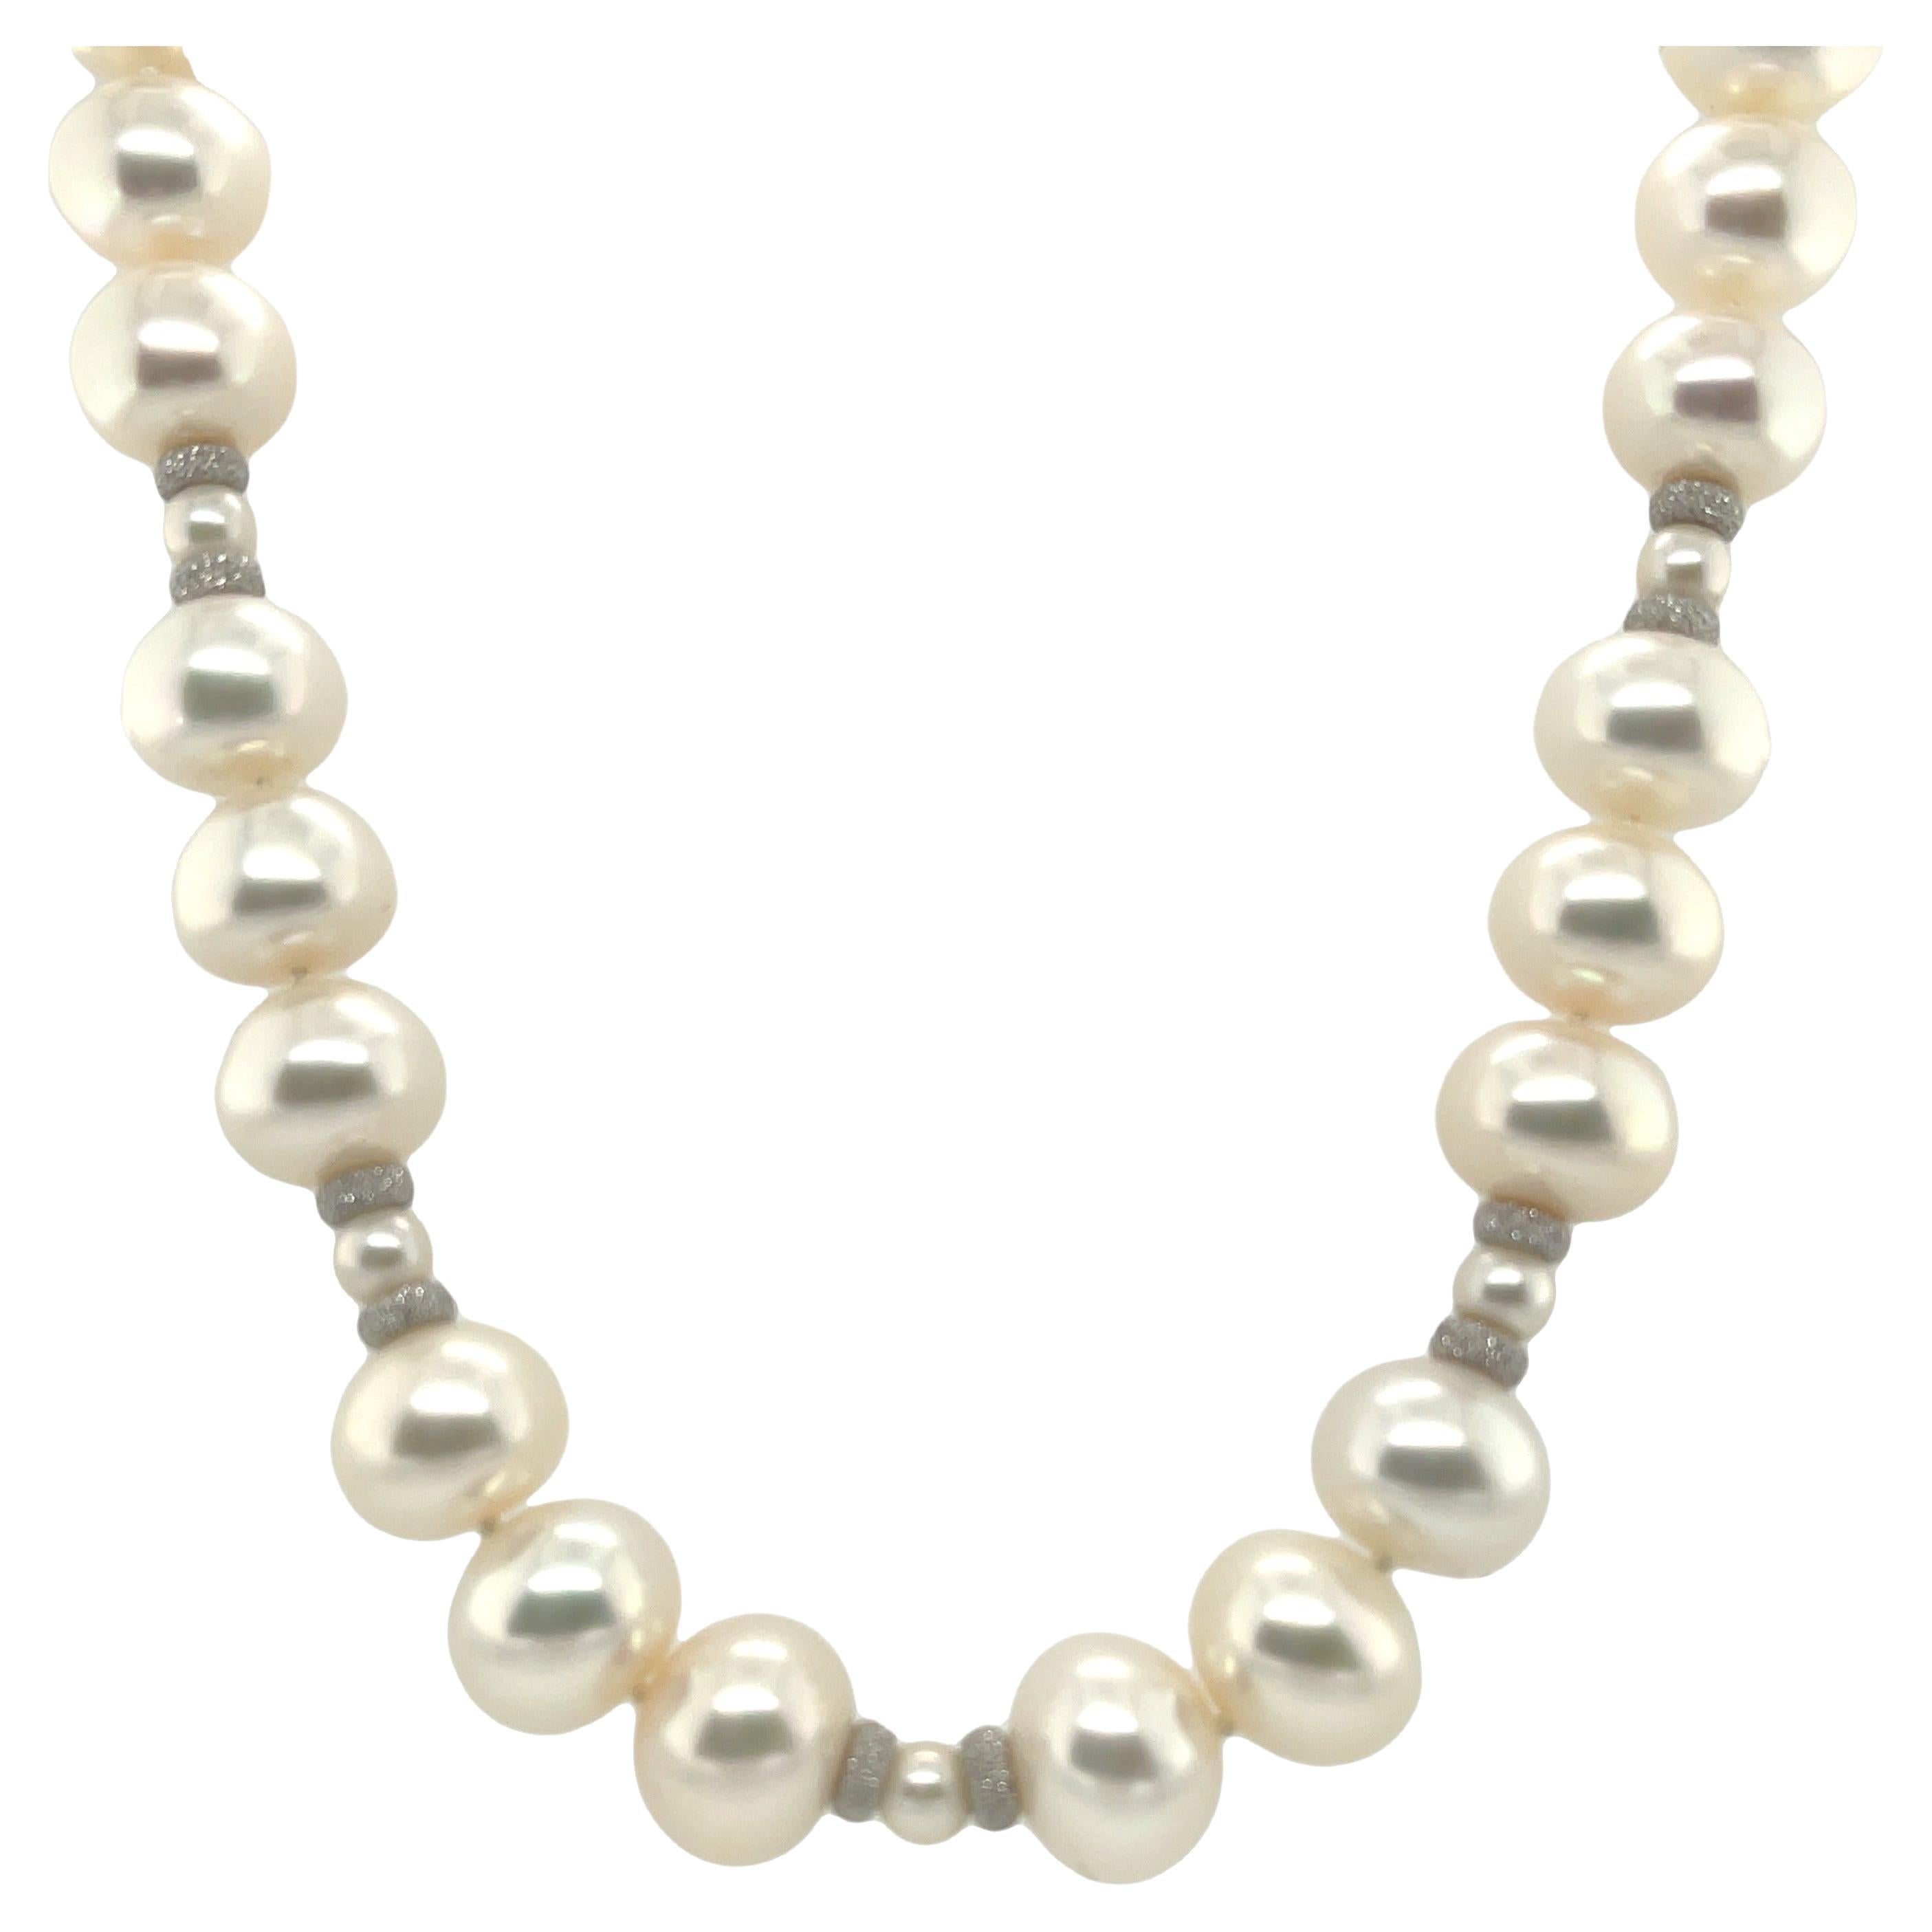 White Freshwater Pearl Necklace with White Gold Accents, 18.5 Inches For Sale